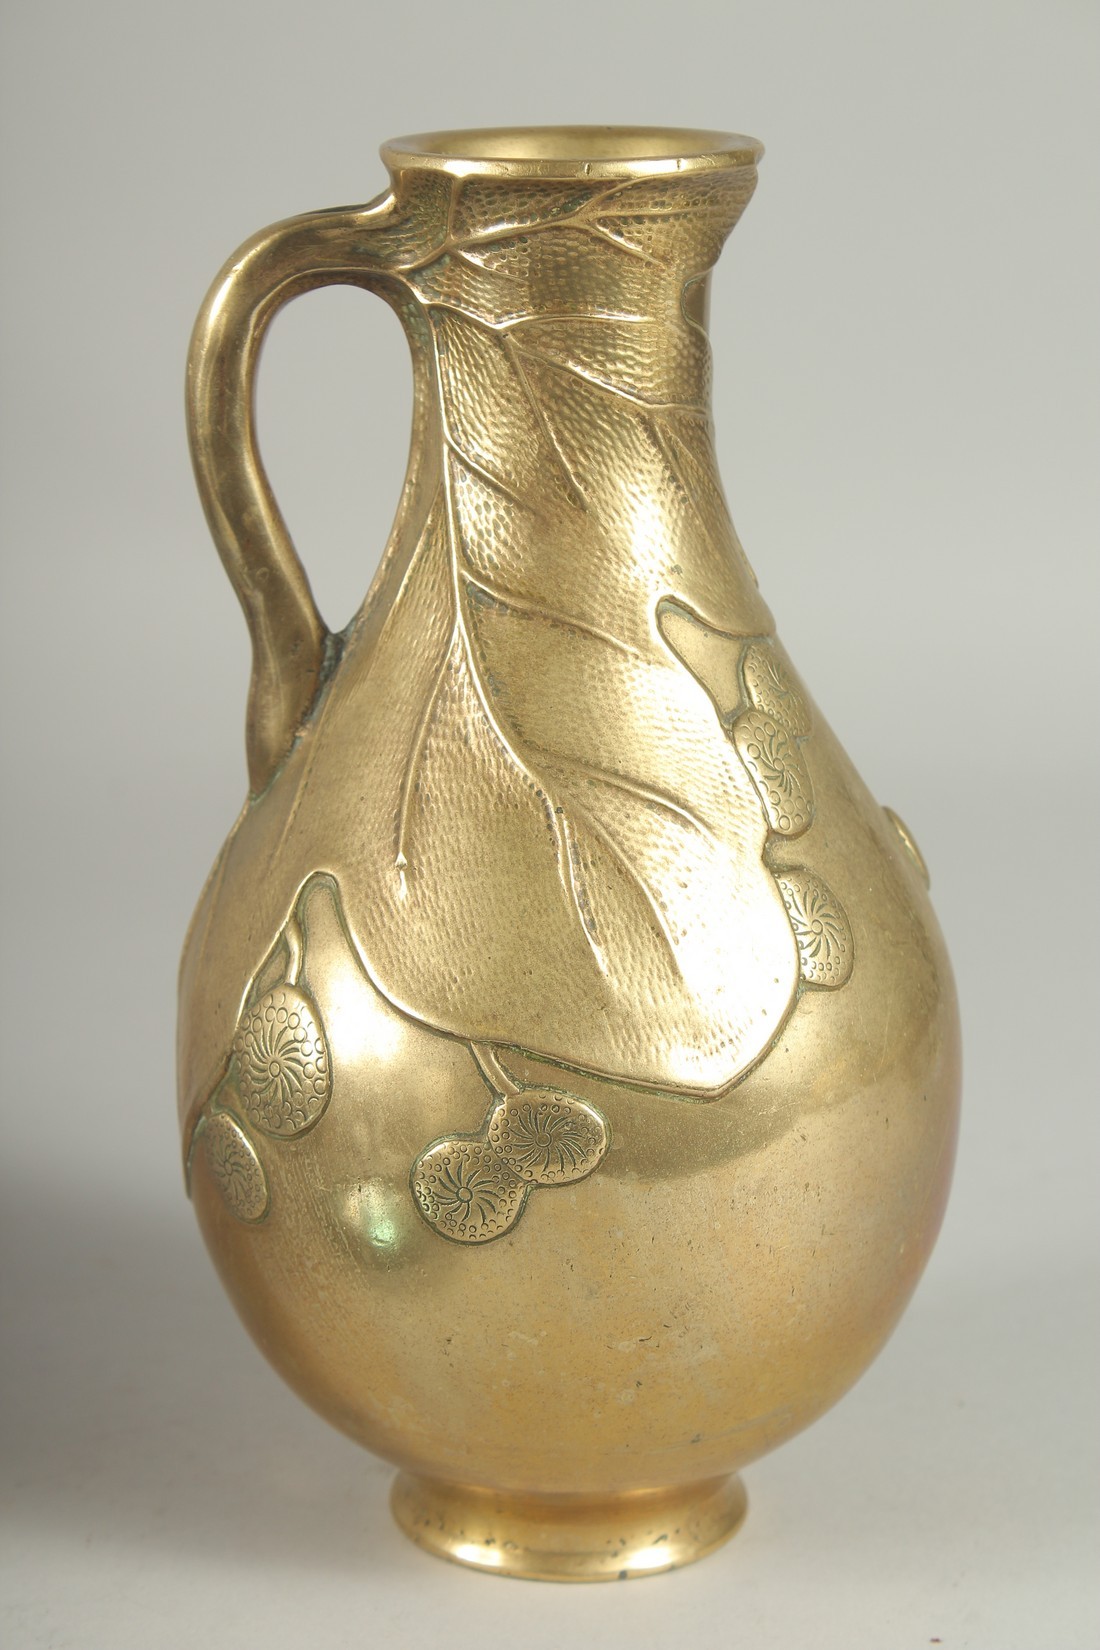 A JAPANESE BRASS JUG, with relief foliate decoration, 23cm high. - Image 3 of 6